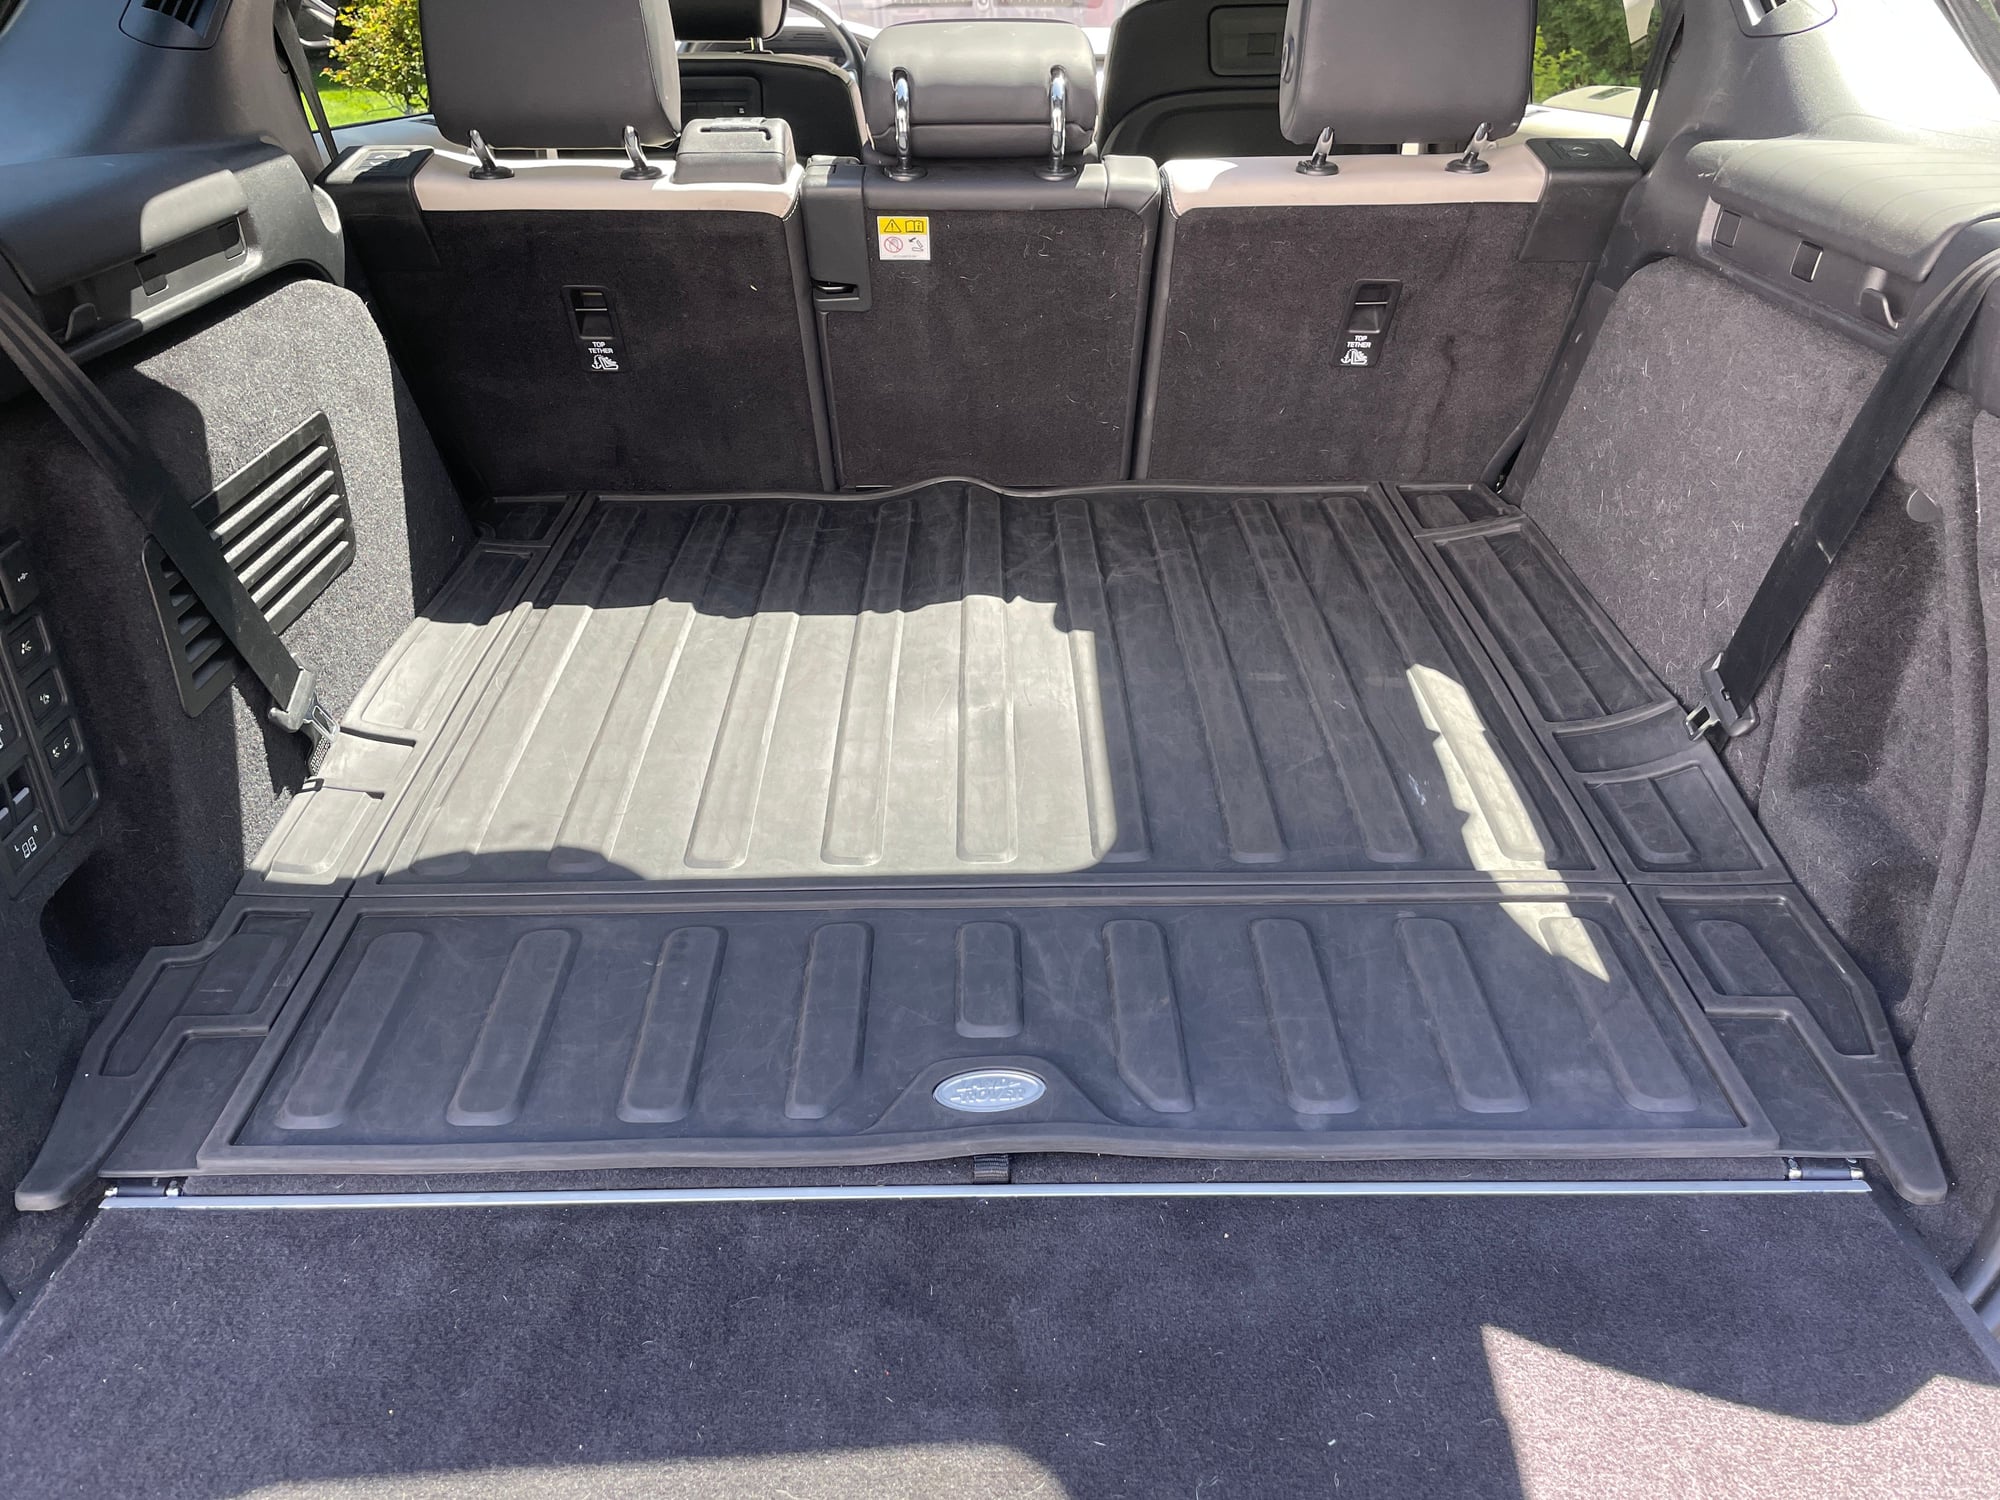 Interior/Upholstery - Discover 5 L462 OE Rubber Cargo Mat - Used - 2017 to 2022 Land Rover Discovery - Chatham, NJ 07928, United States